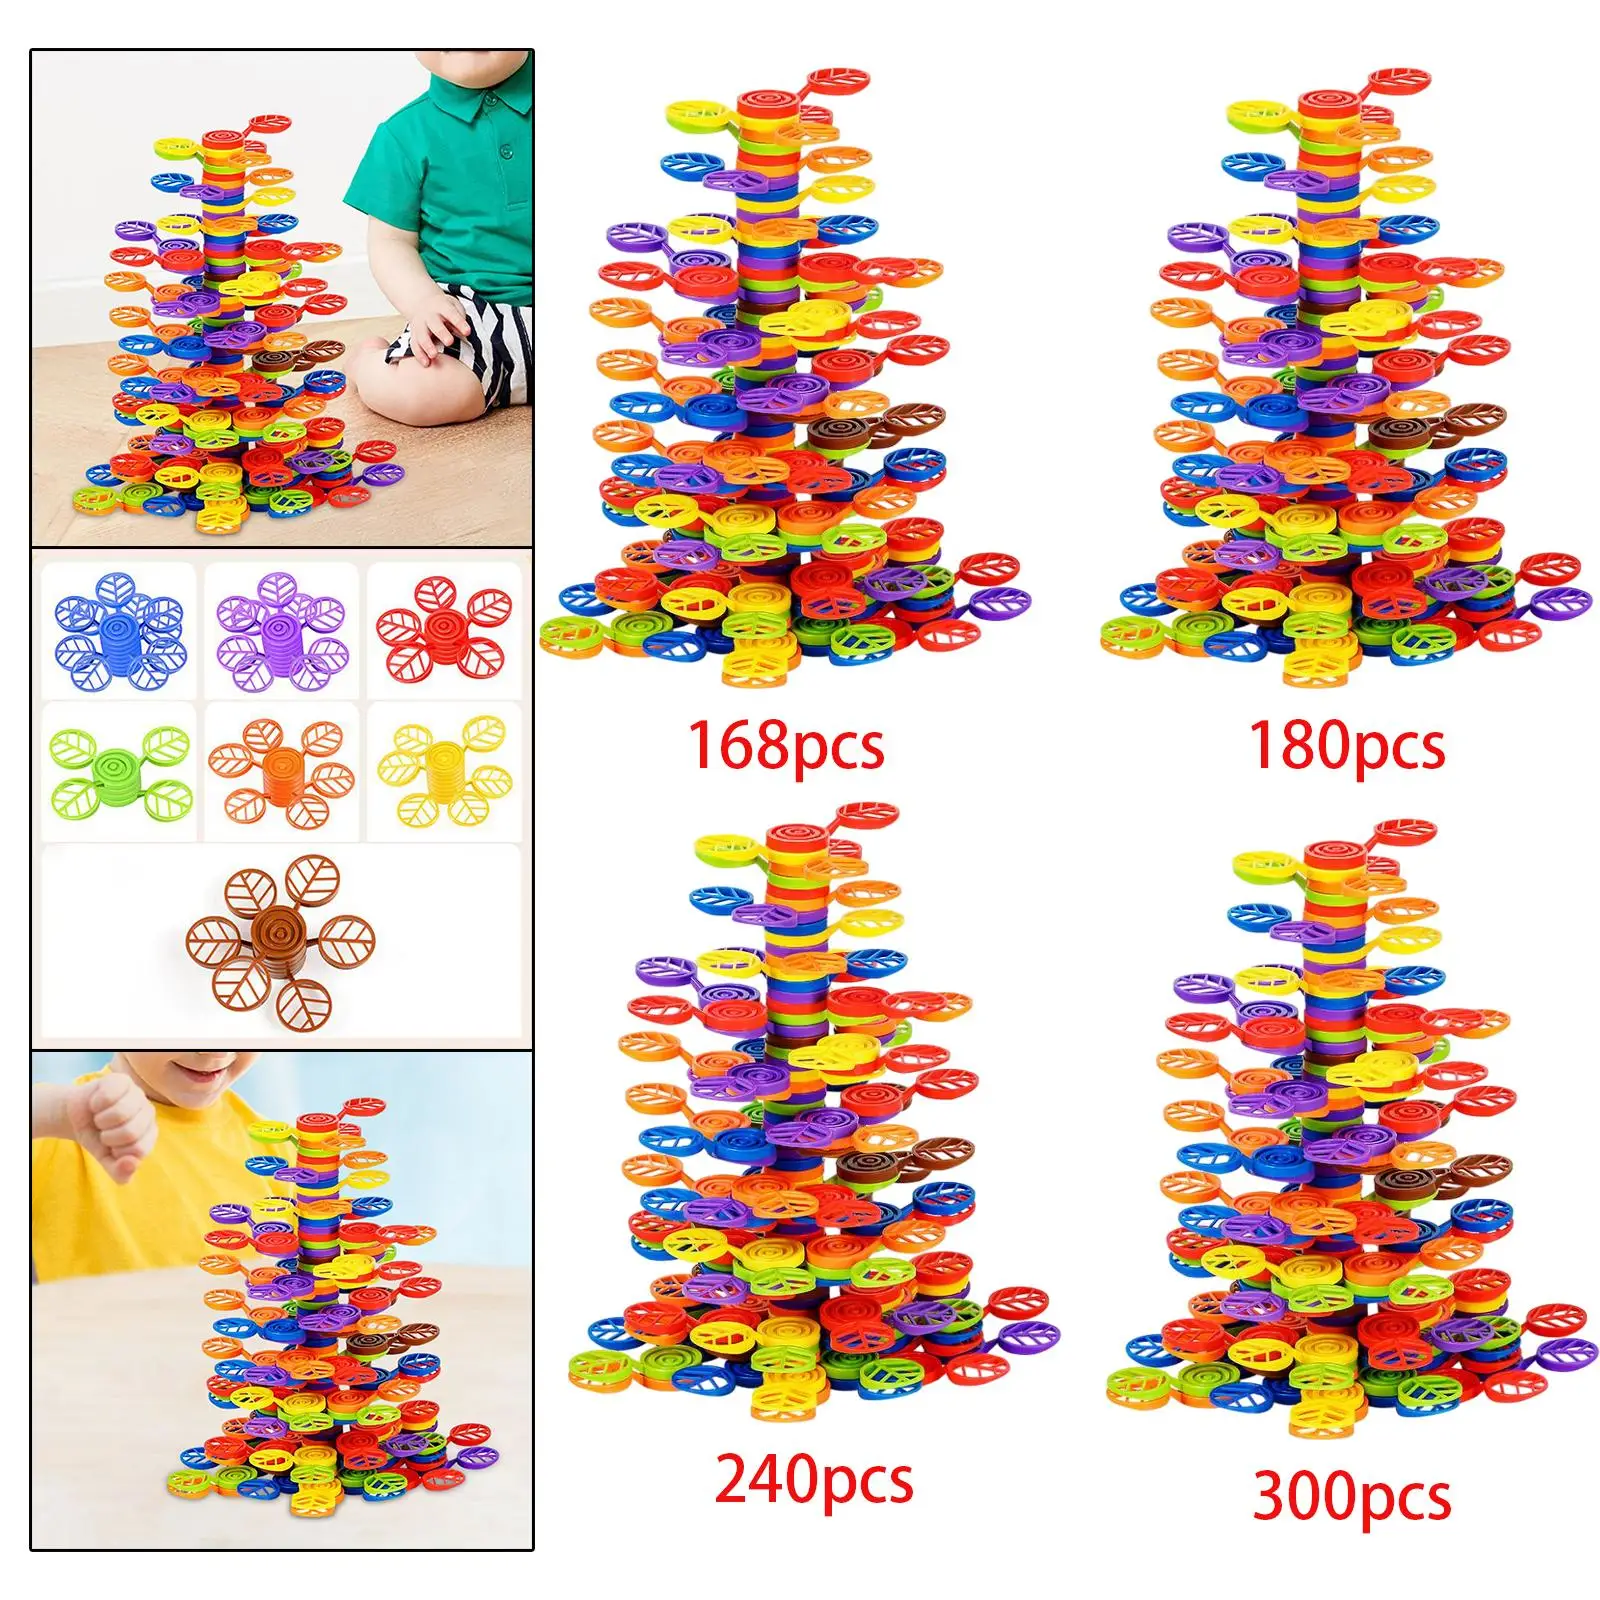 Stacking Games Toys Balance Game Building Toys for Boys Girls Birthday Gifts